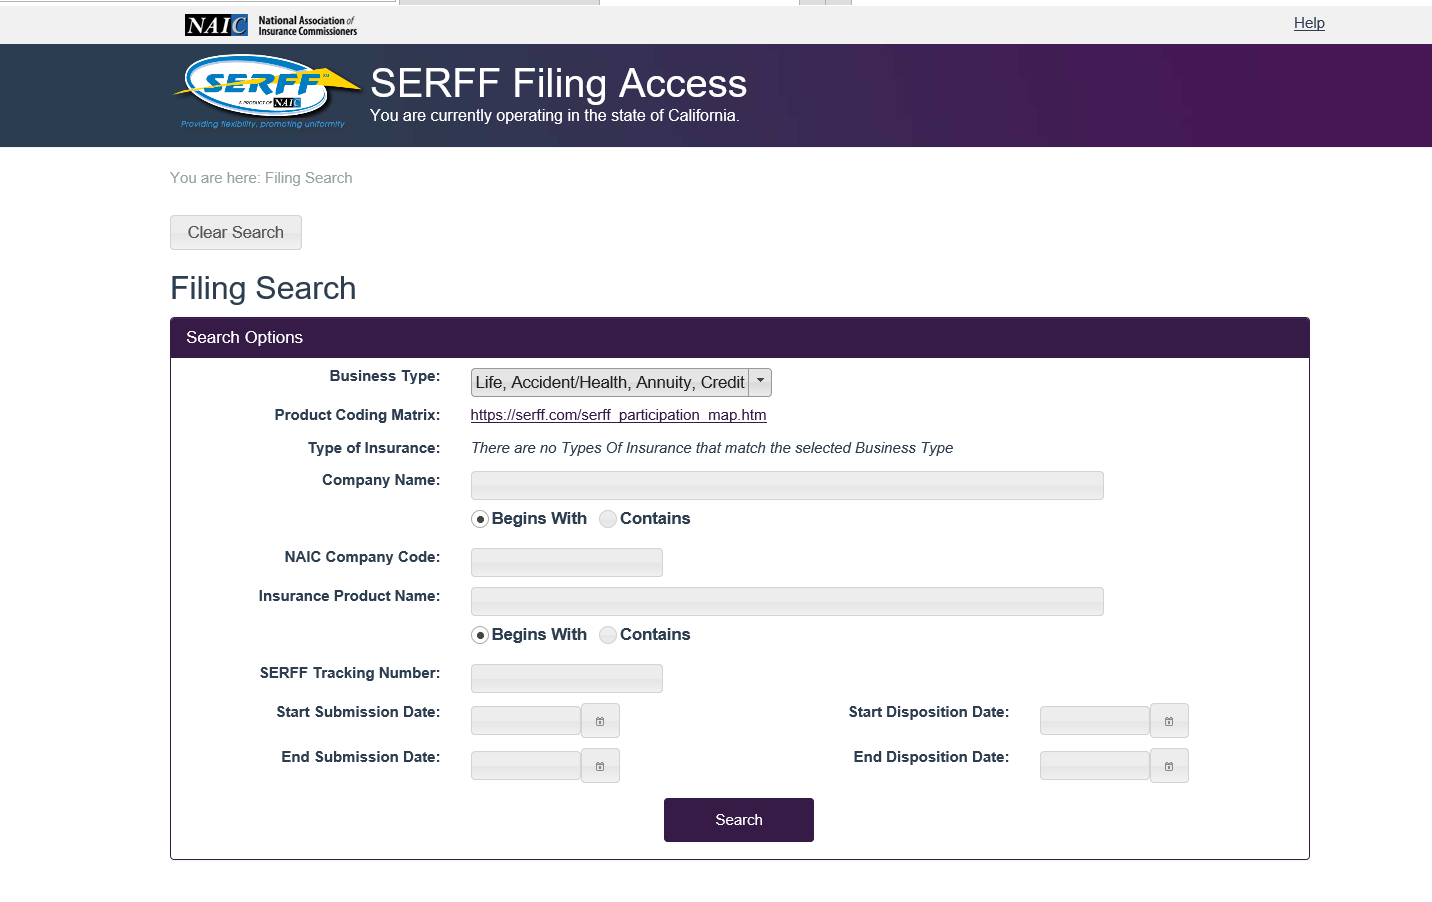 SERFF-Search screen example